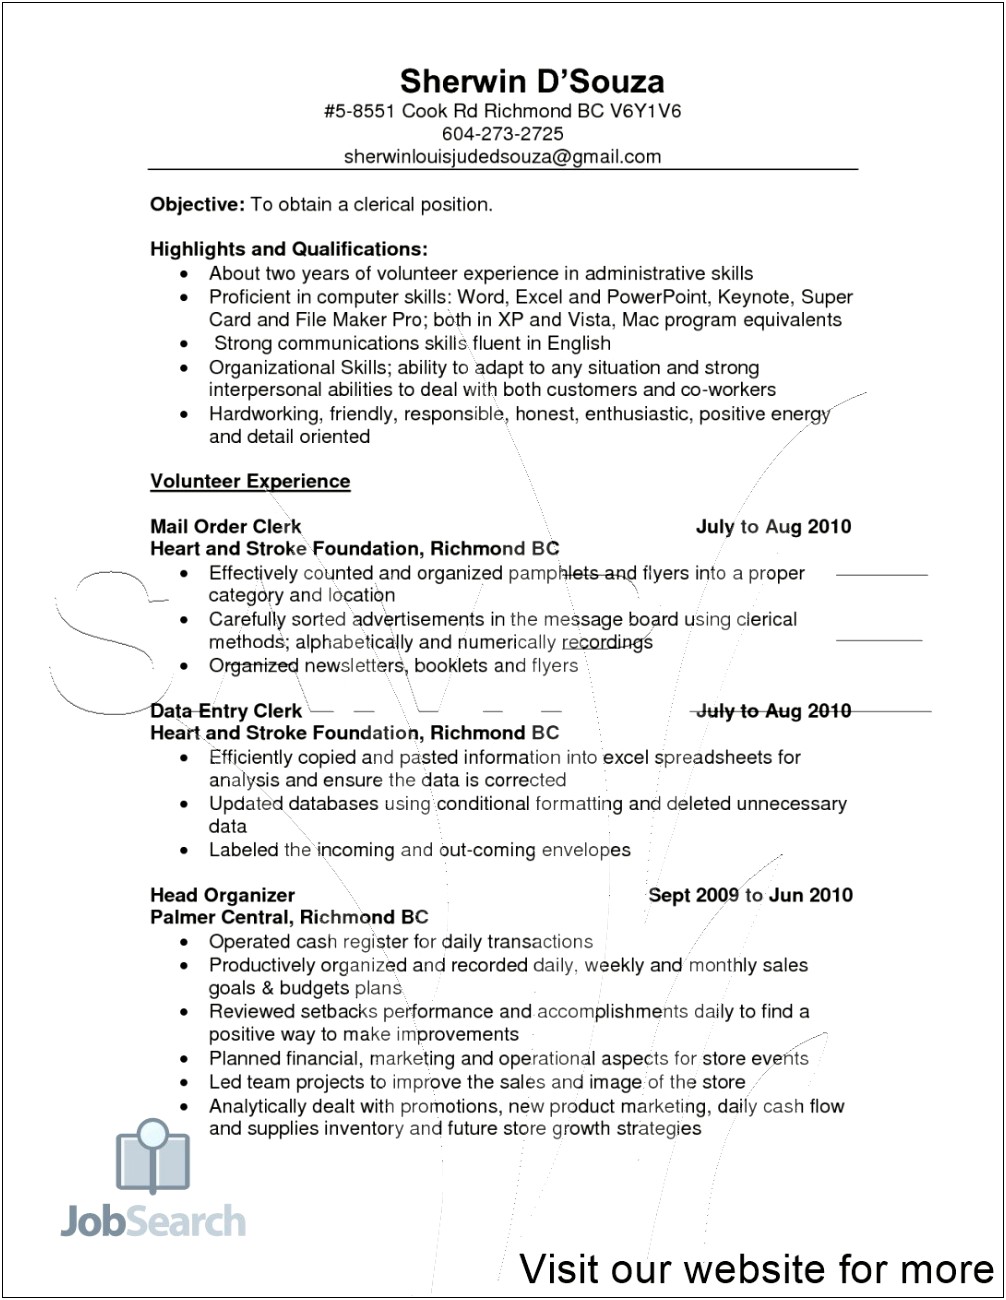 Objective Of Barista For Resume